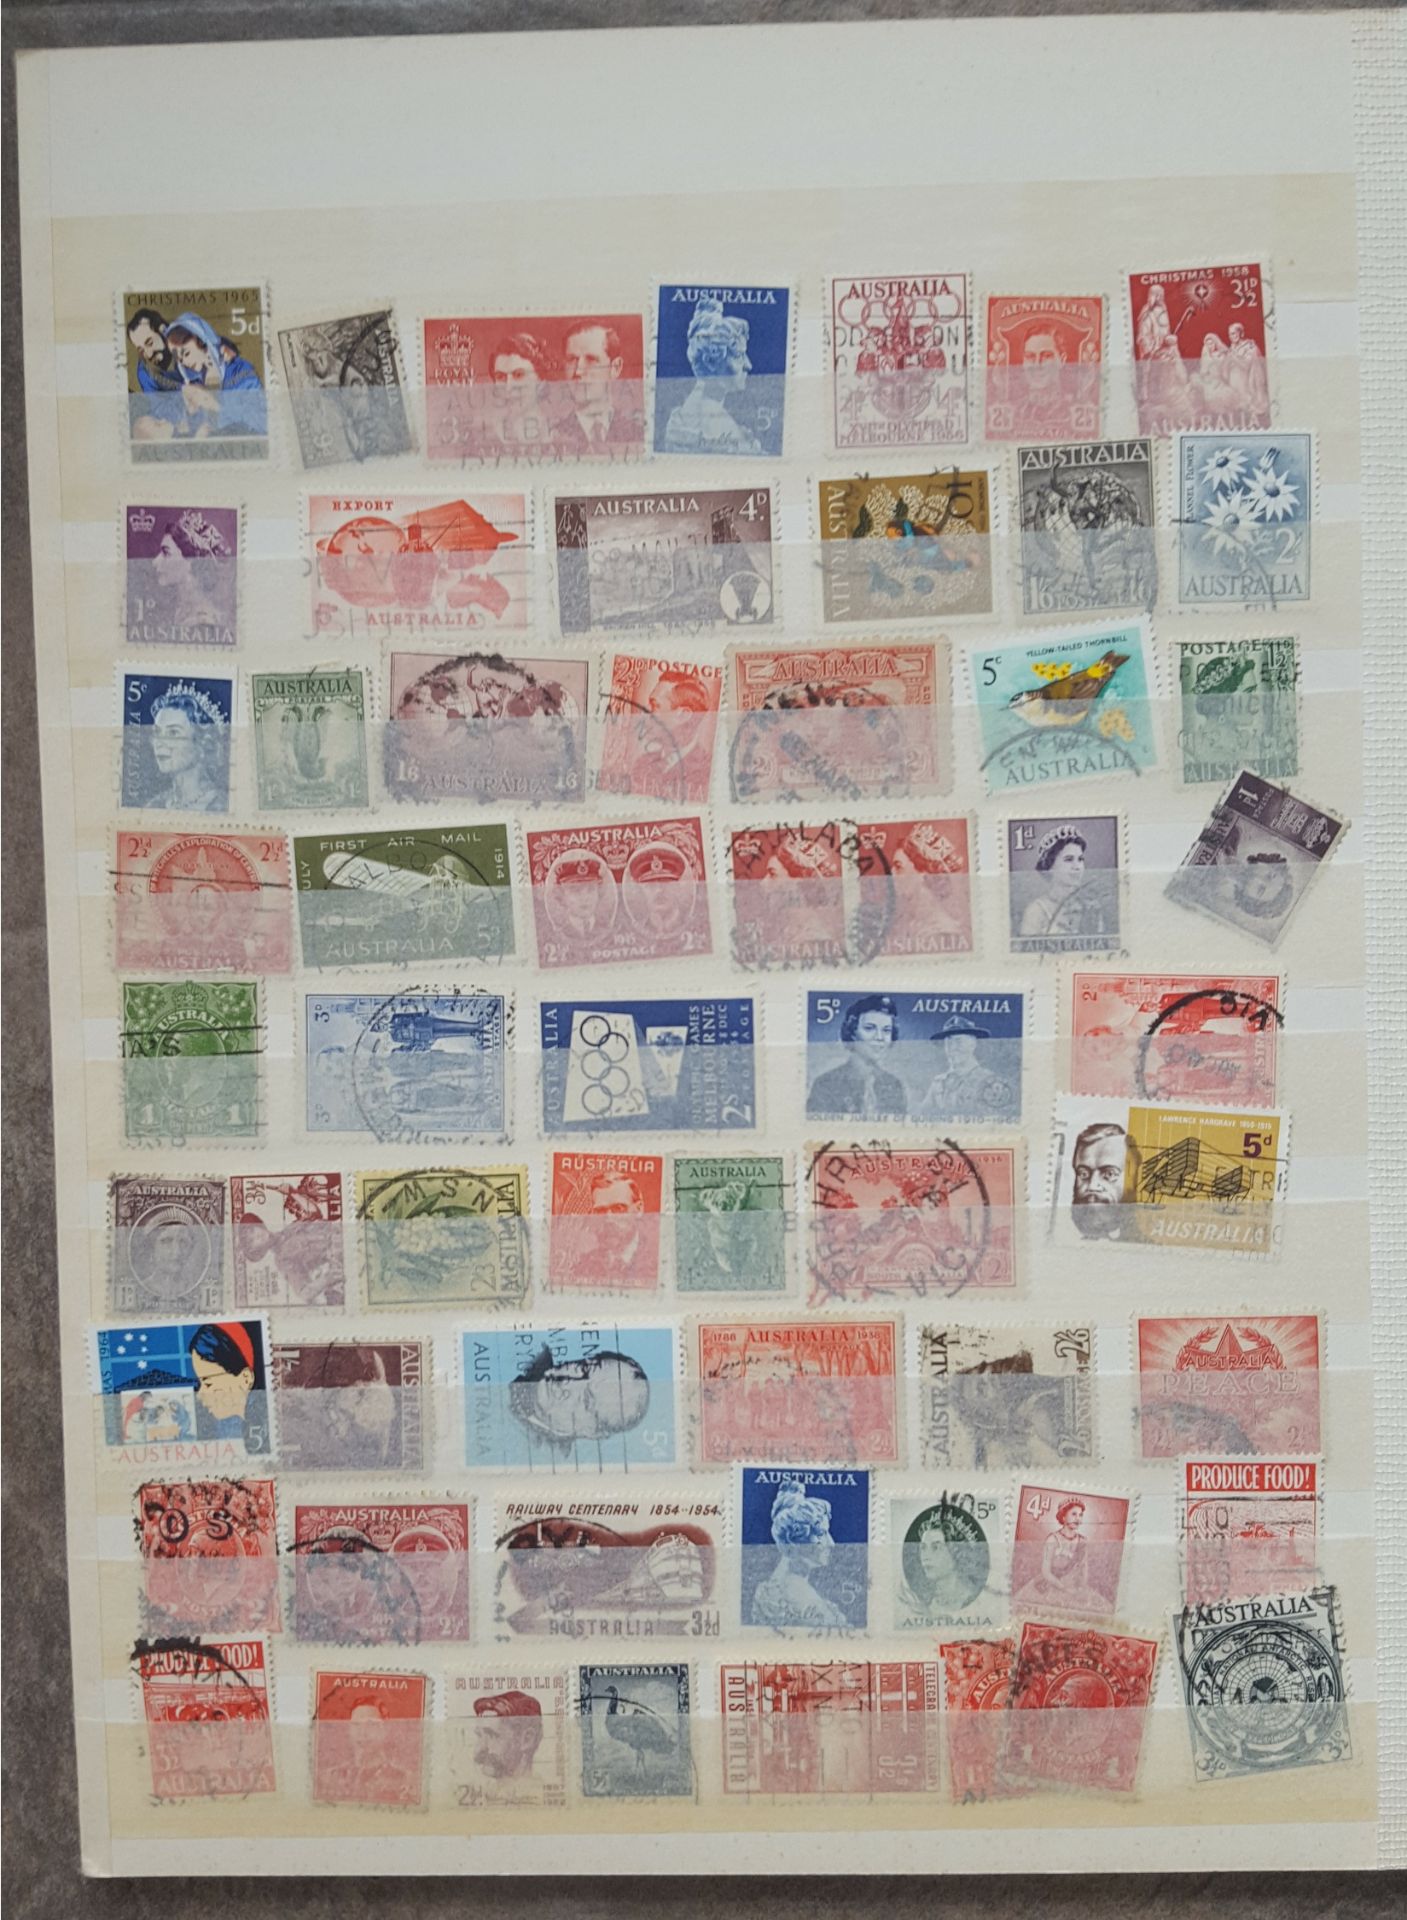 Vintage Retro Stamp Album Stock Book Many Themes & Countries - Image 3 of 3